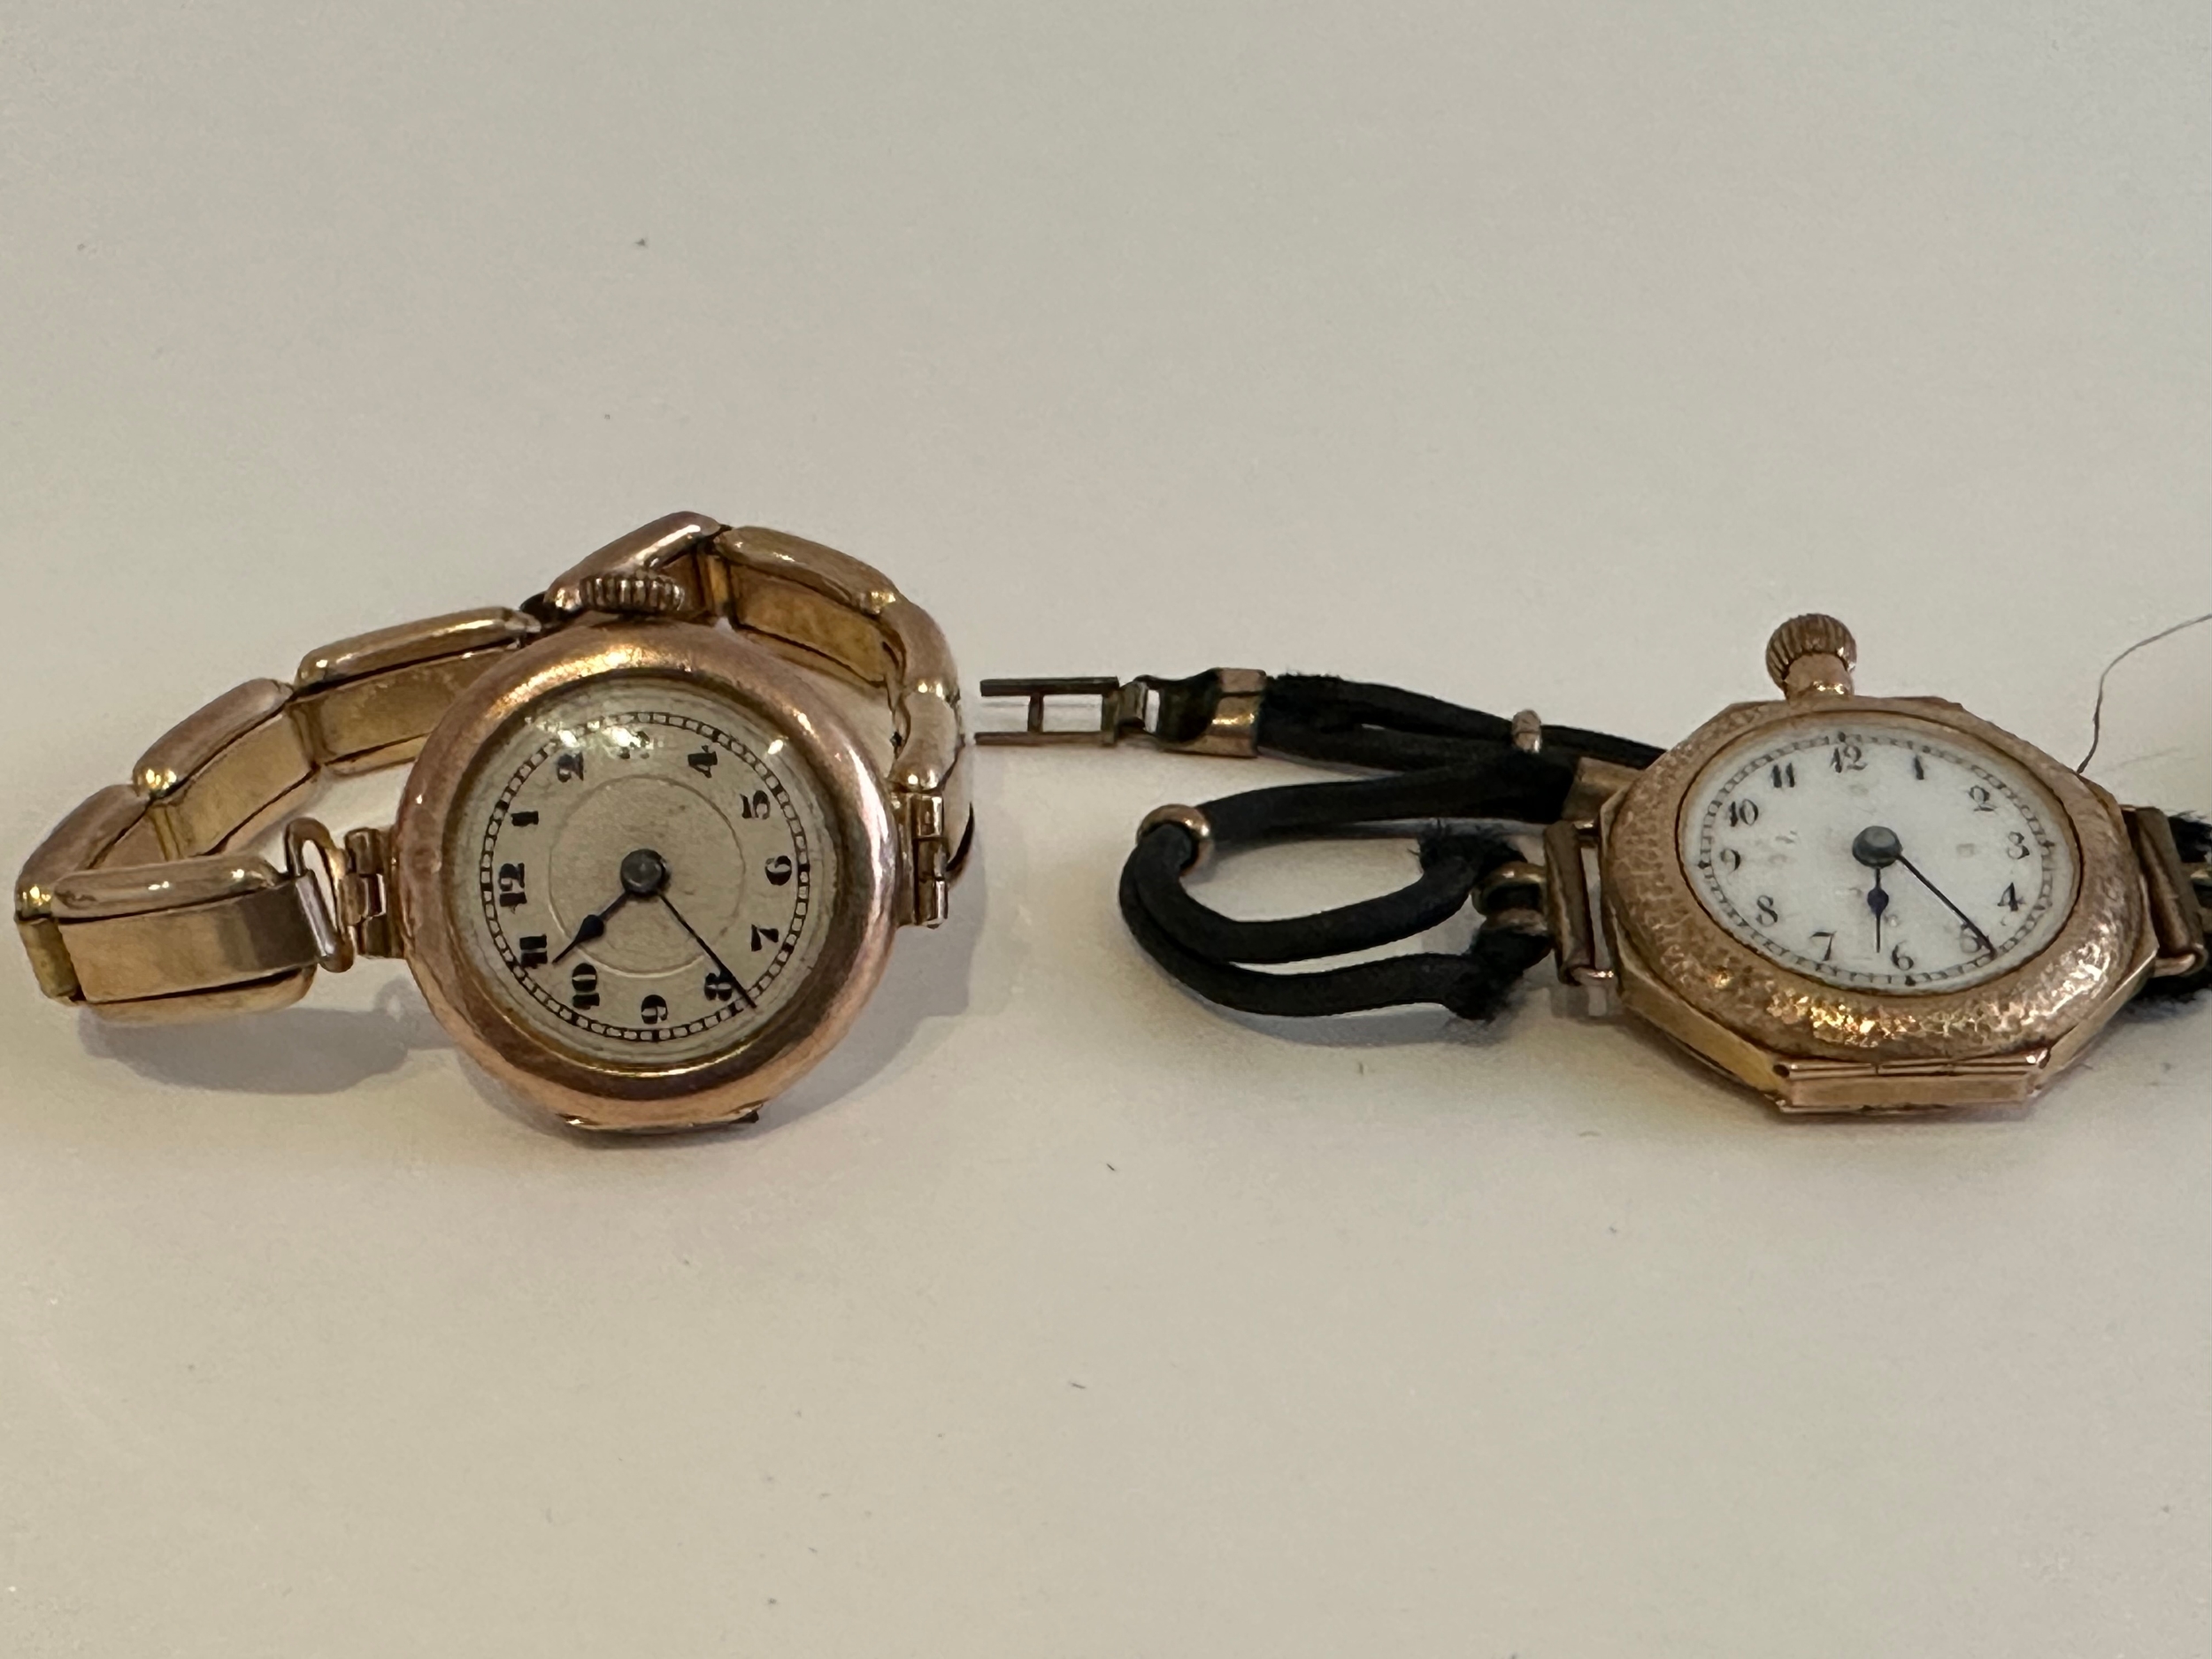 Three 9 carat gold vintage ladies cocktail watches. One with an engraved foliate design bezel and - Image 2 of 4